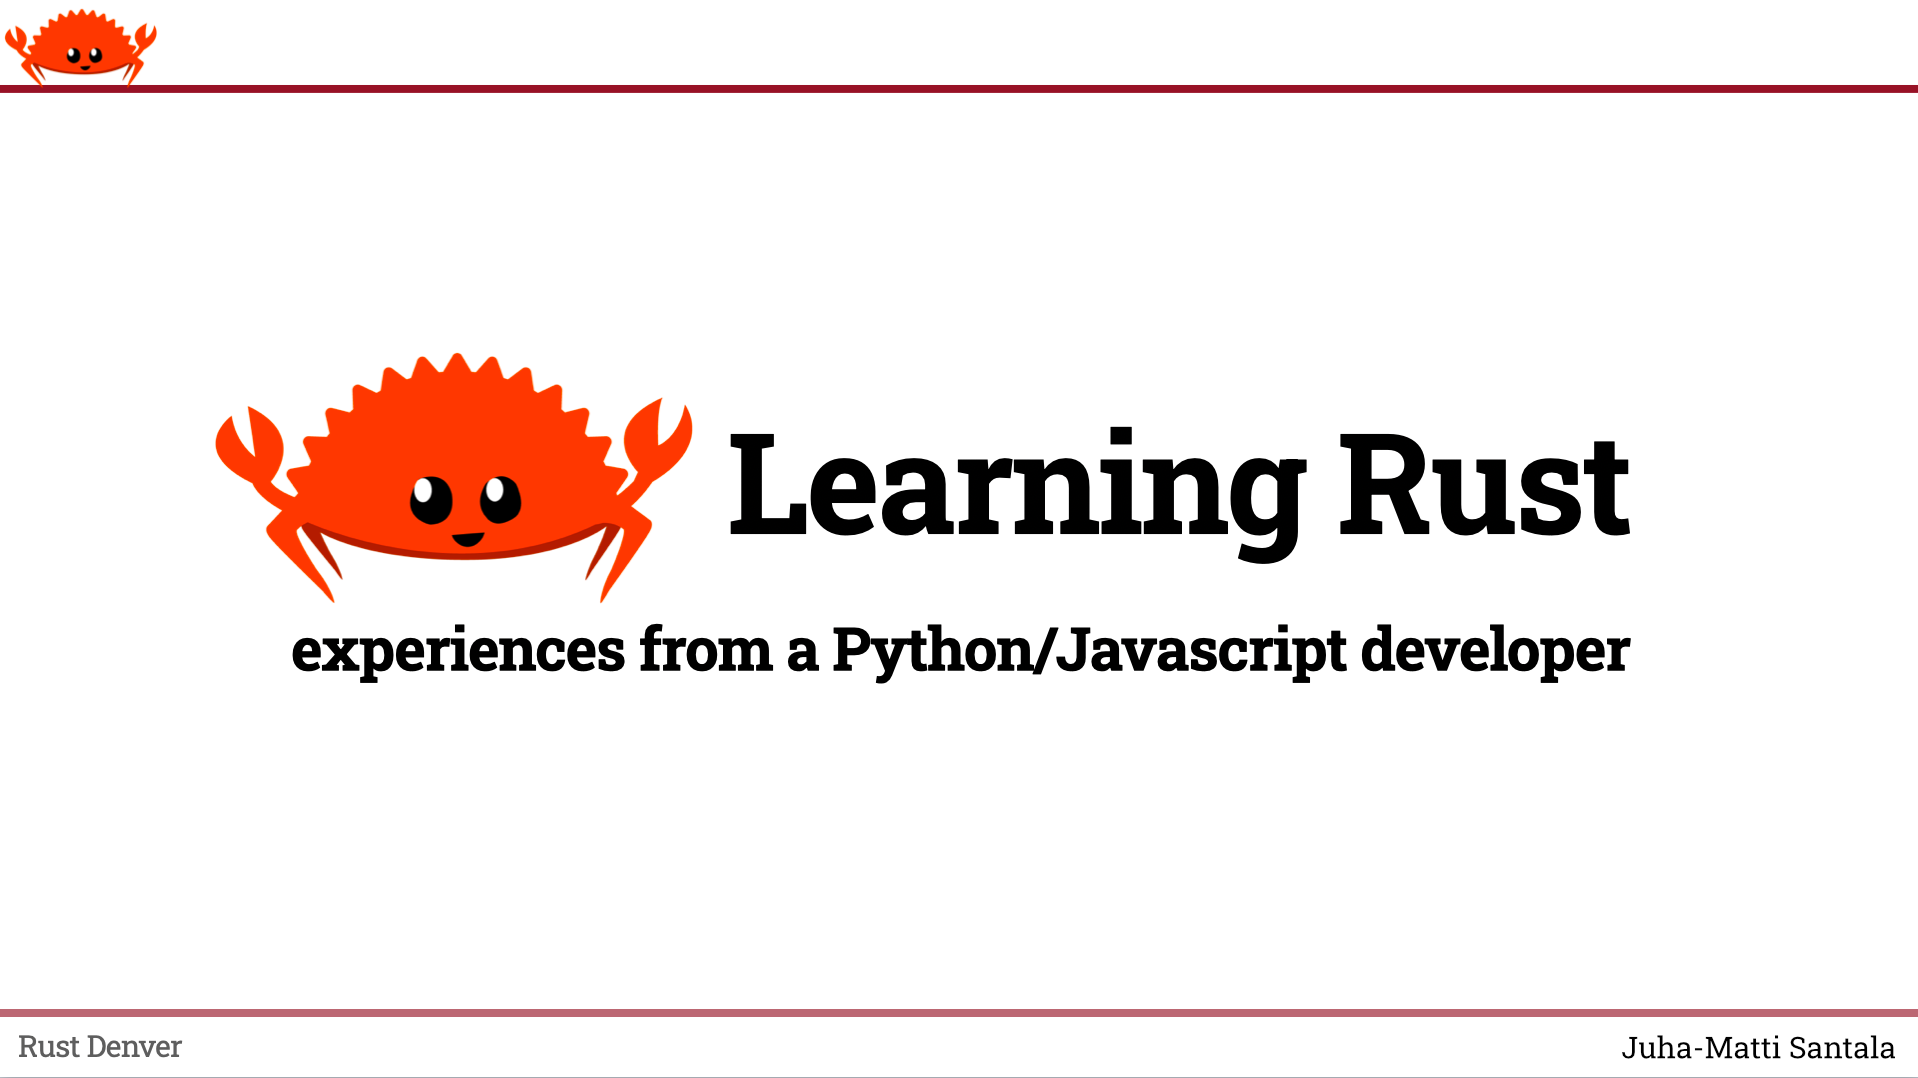 A presentation slide with Ferris the Rustacean mascot and text "Learning Rust - experiences from a Python/Javascript developer"